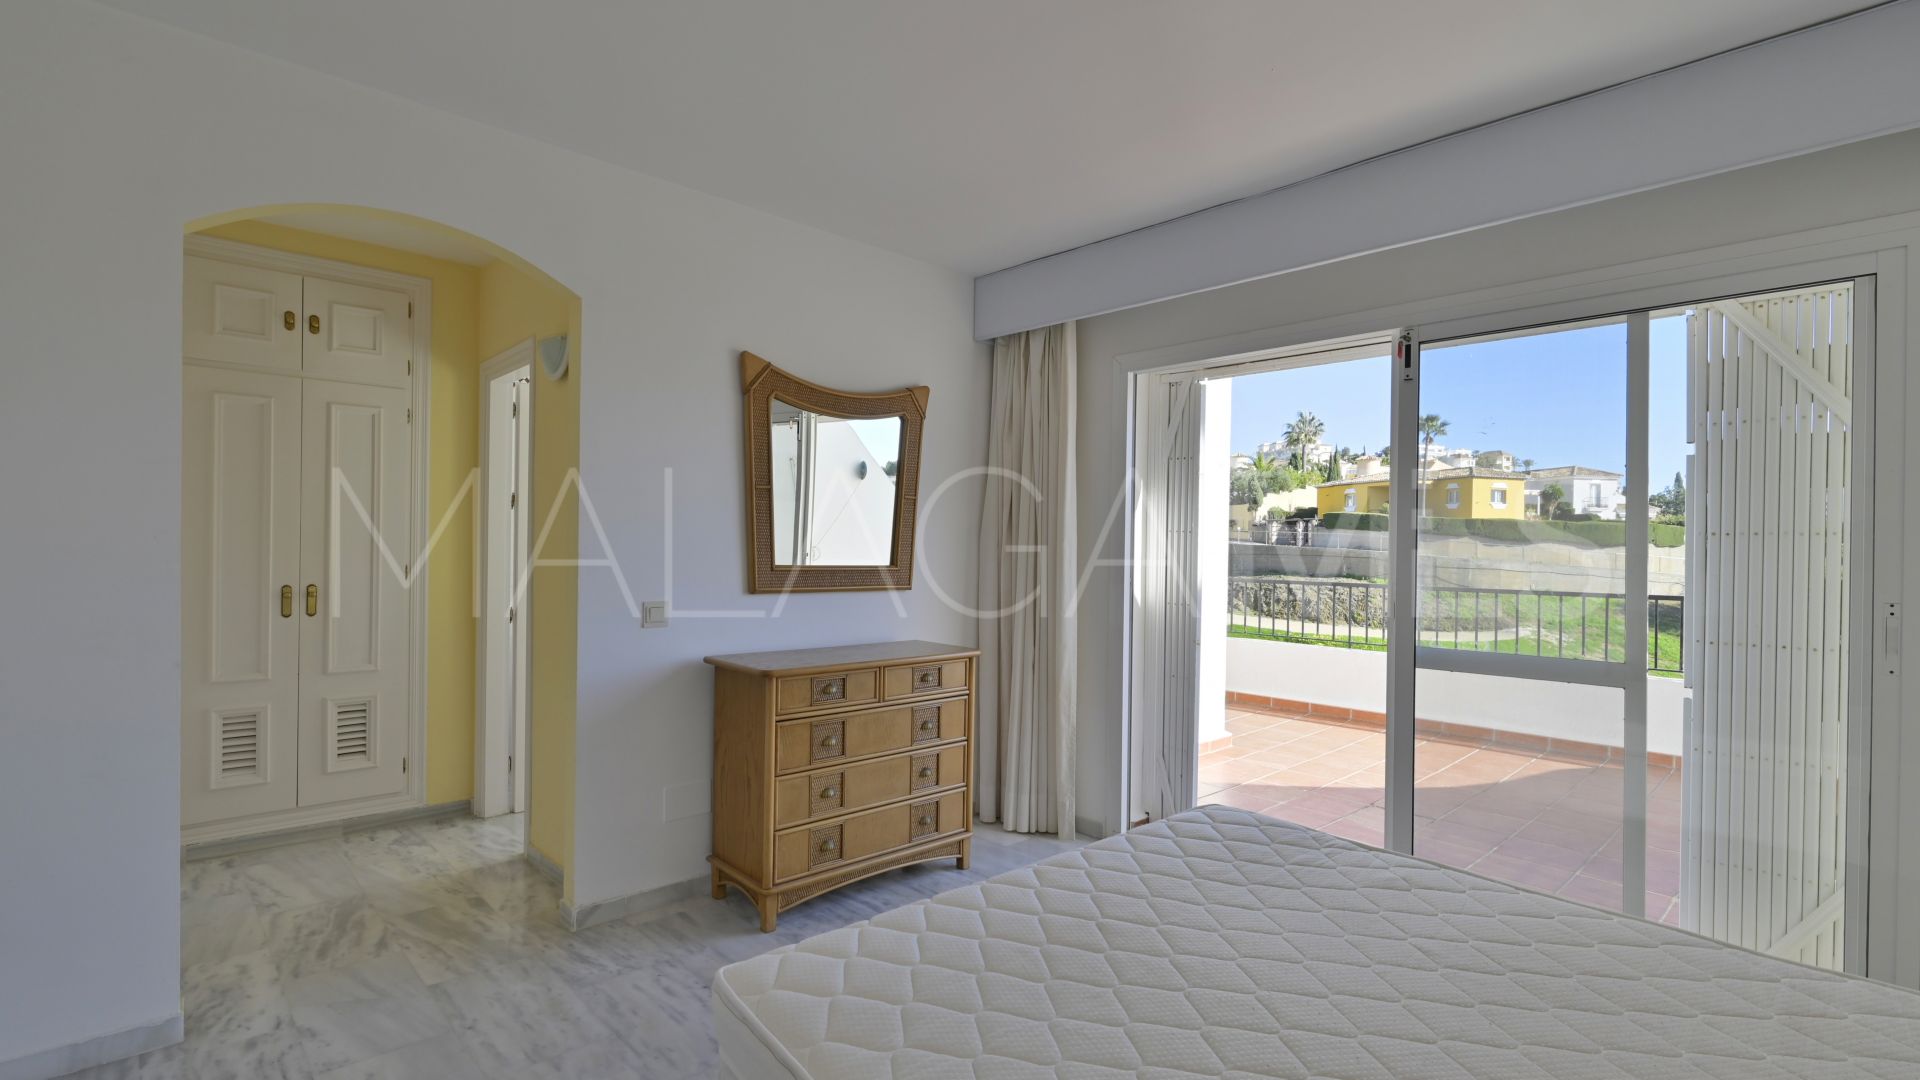 Town house with 2 bedrooms for sale in Riviera del Sol